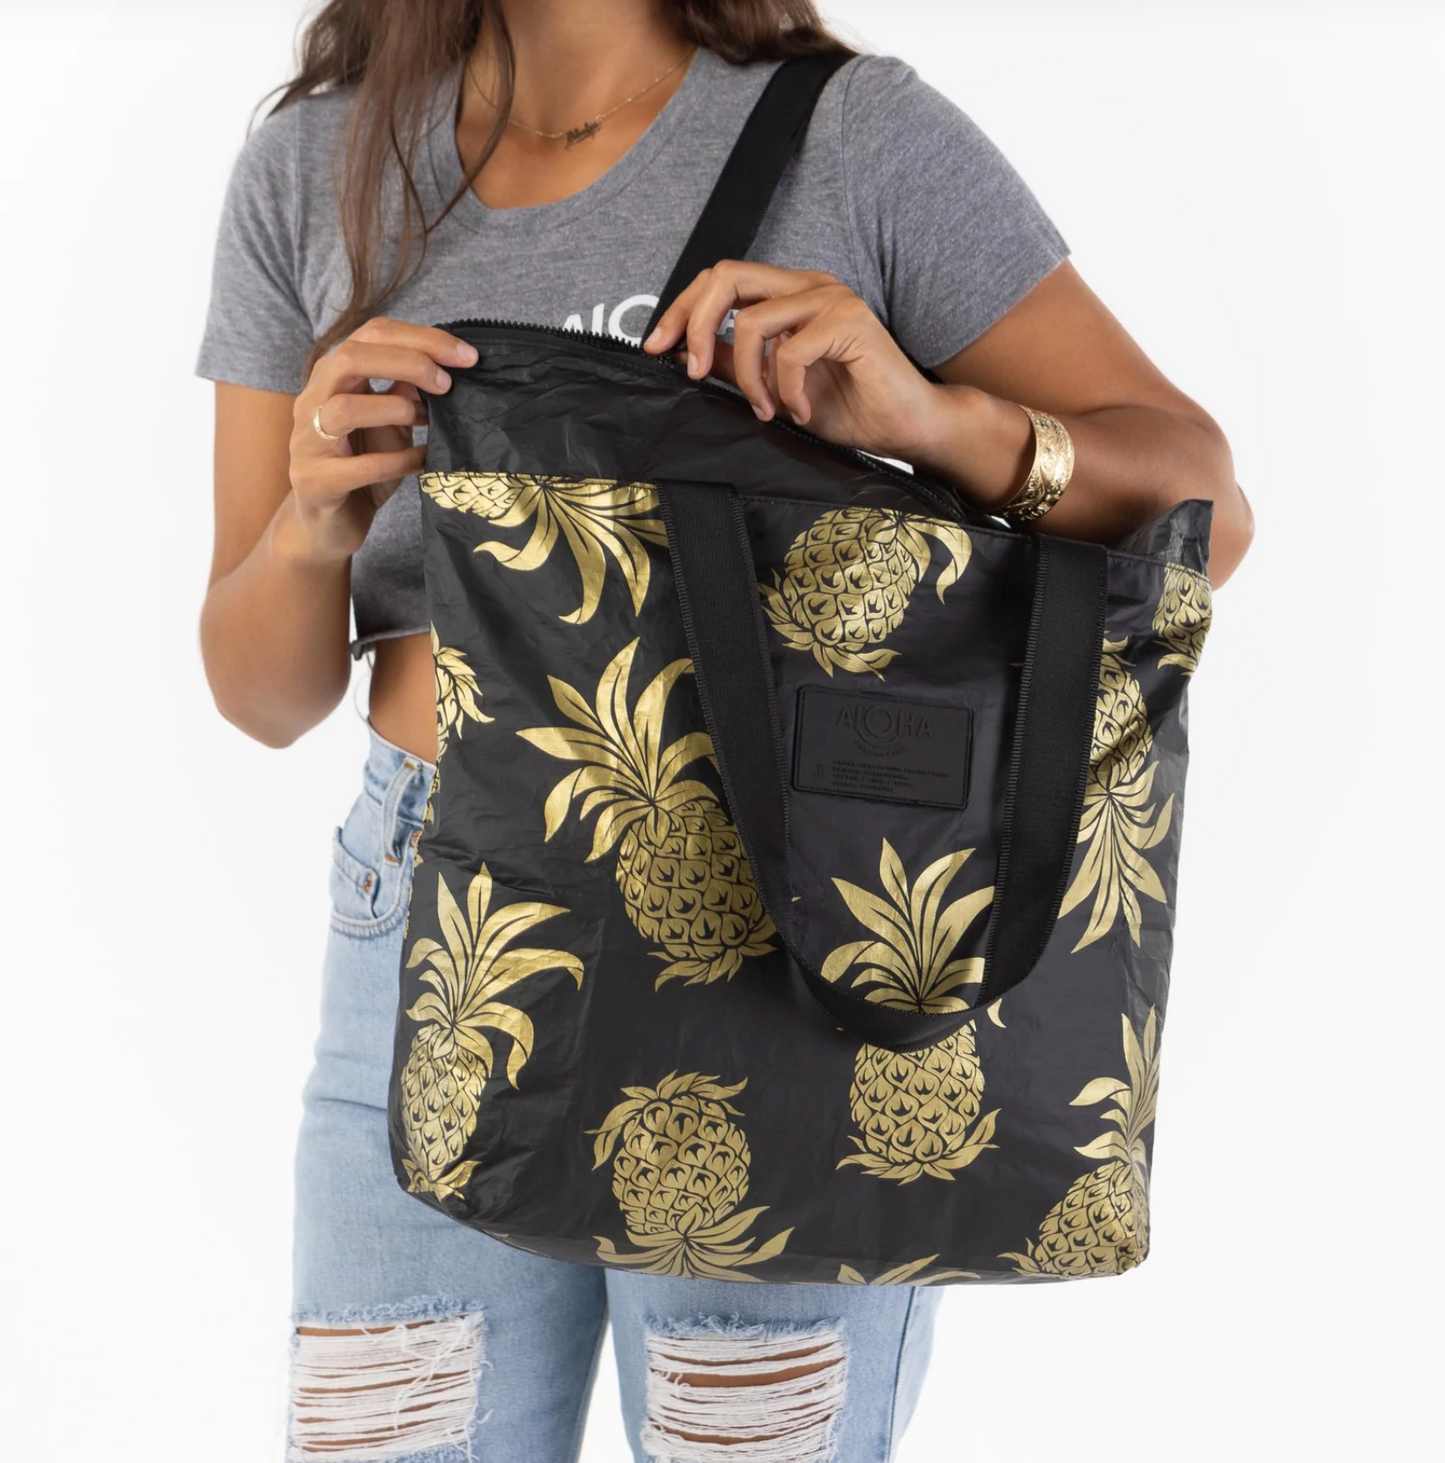 Paina Black Gold - Day Tripper Tote